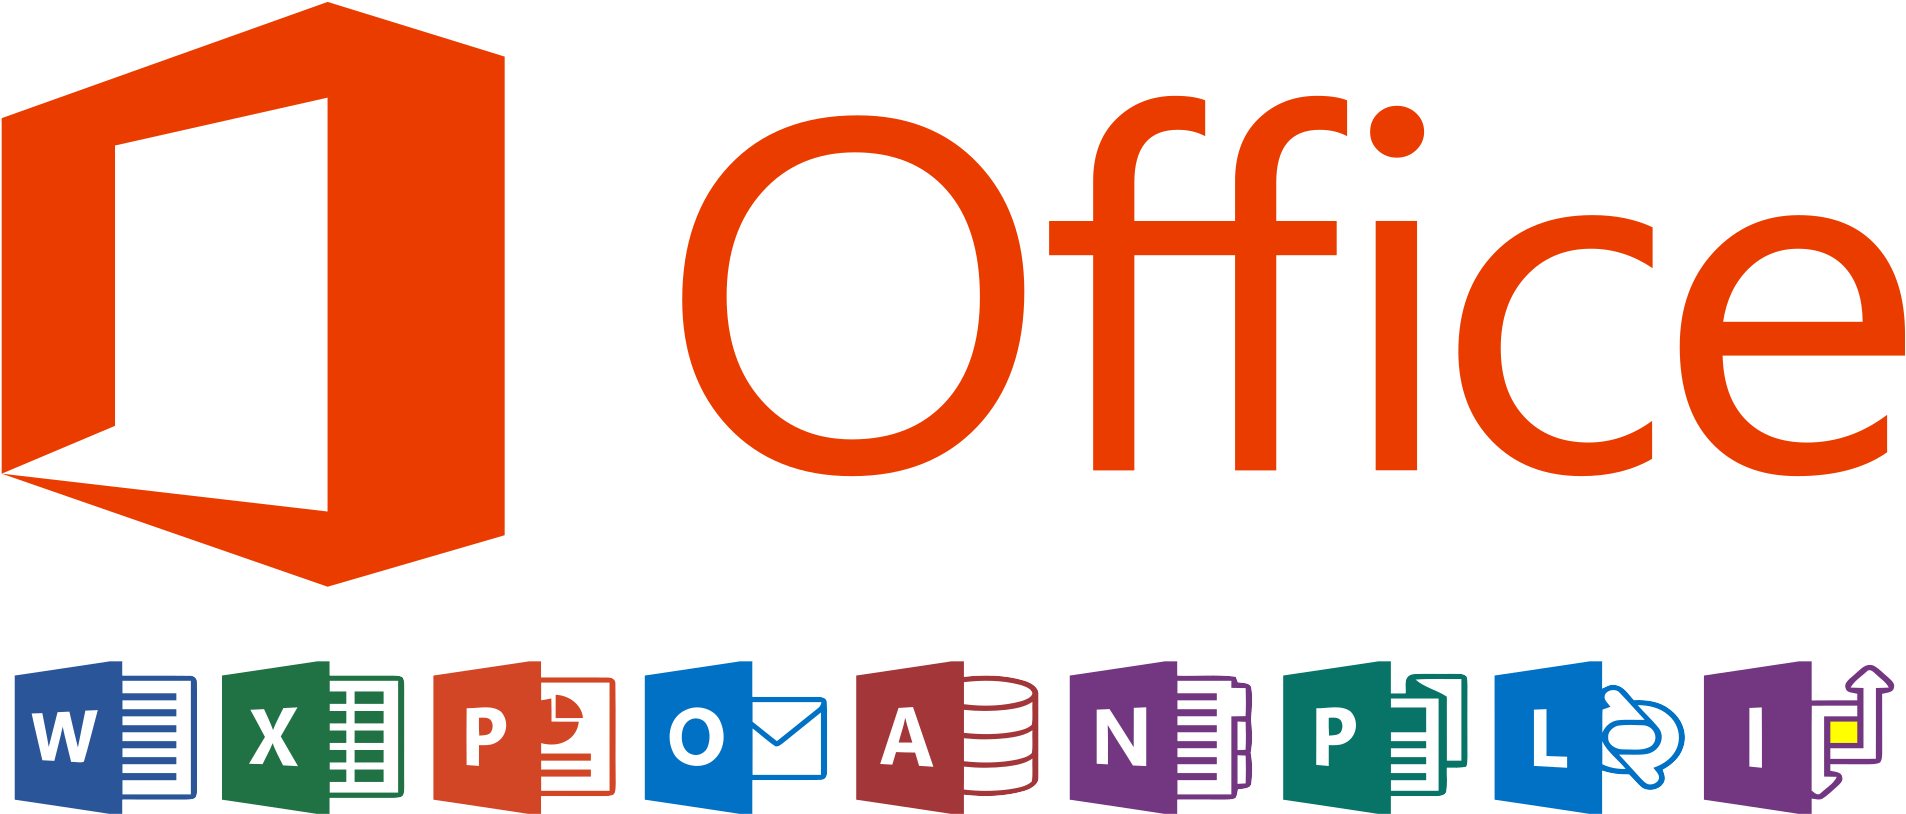 Download Open - Ms Office 365 PNG Image with No Background 